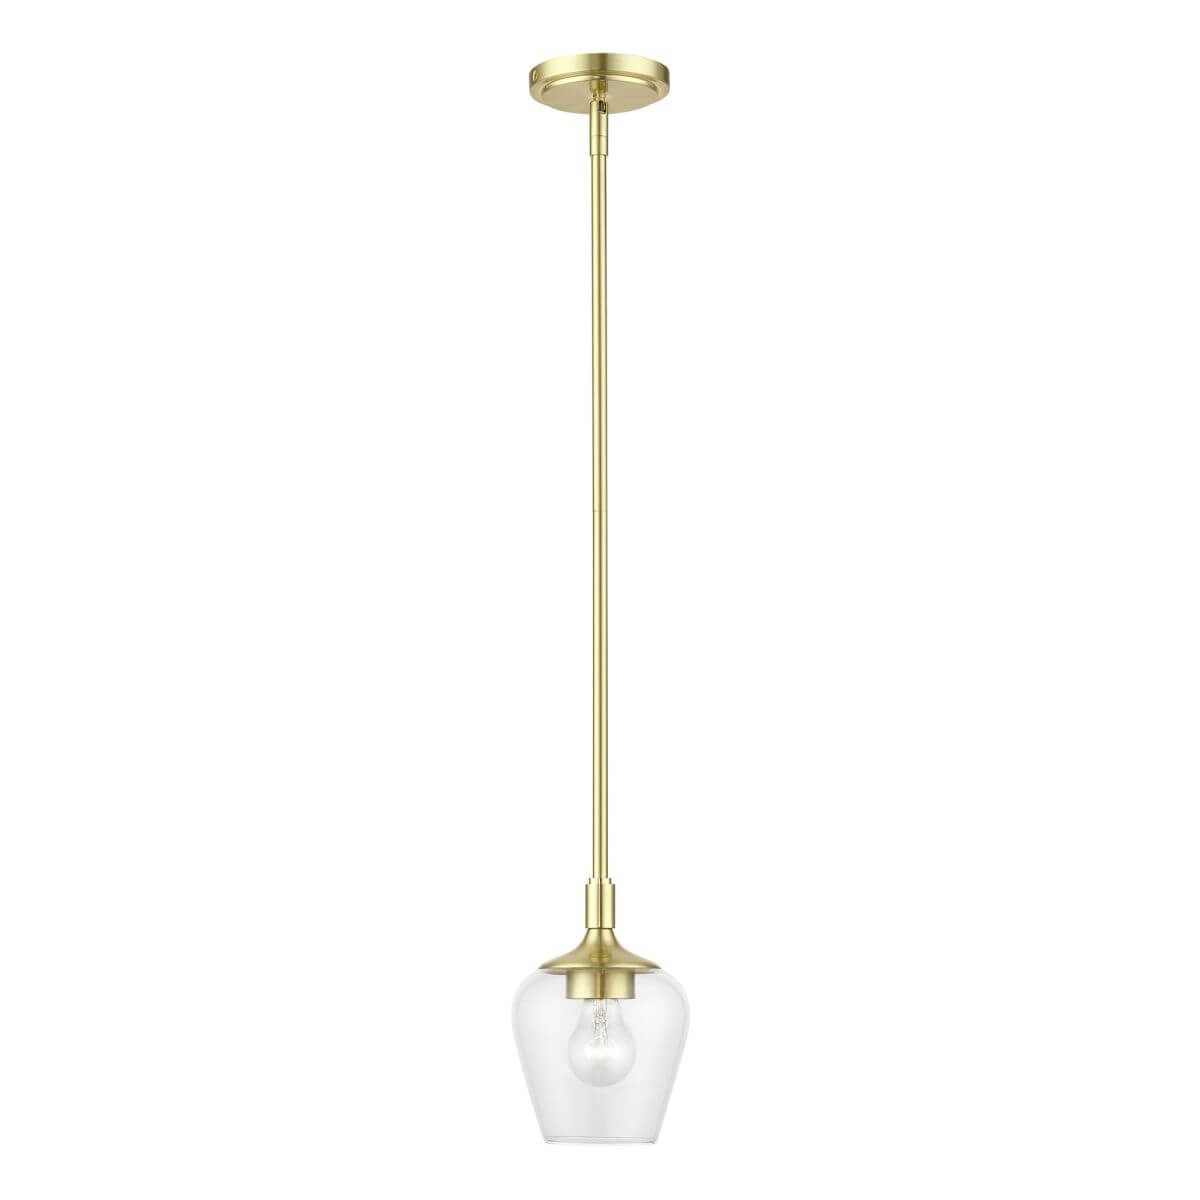 Livex 46721-12 Willow 1 Light 6 inch Pendant in Satin Brass with Clear Glass